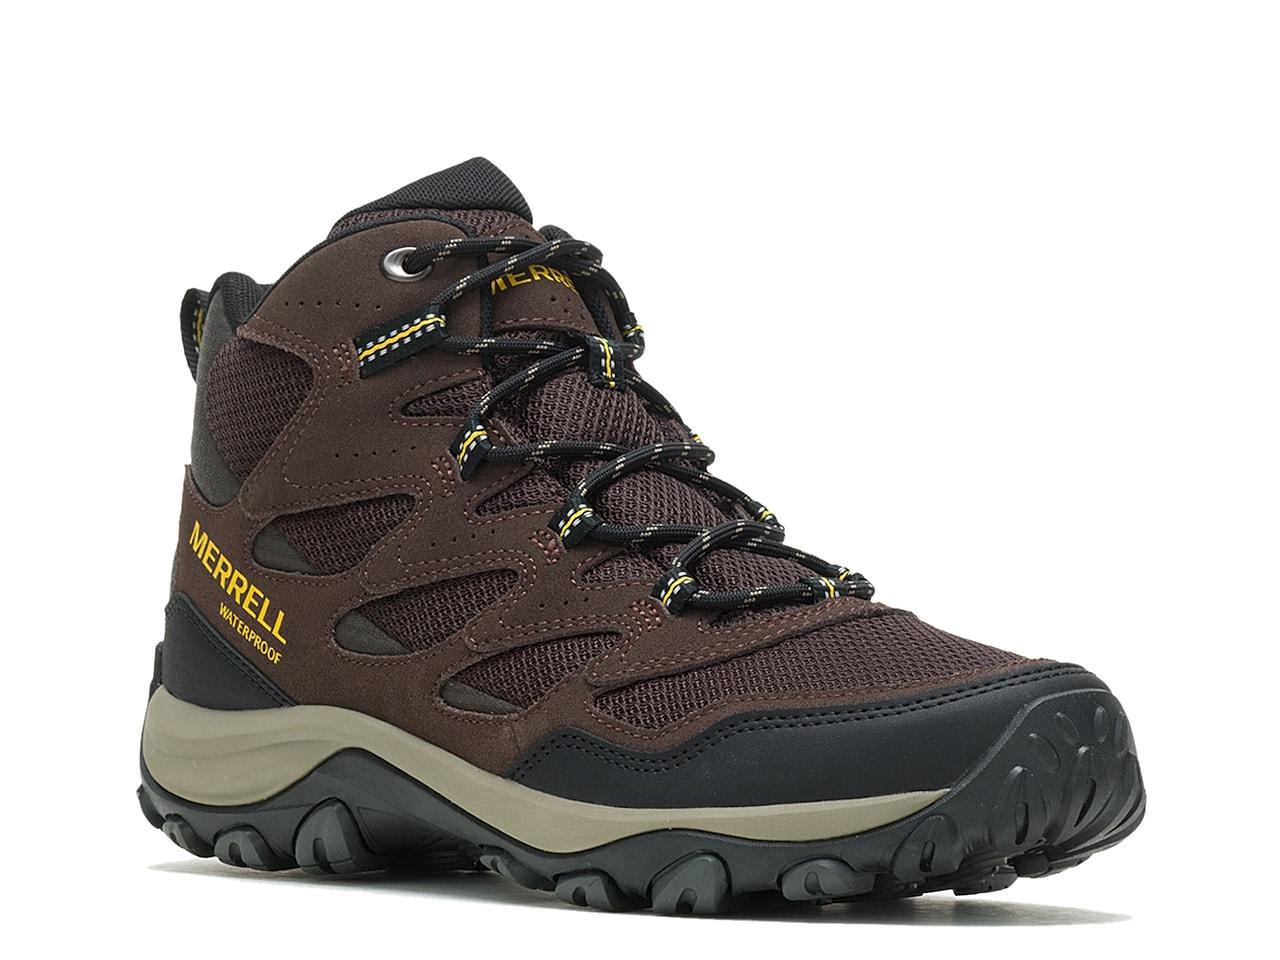 West Rim Hiking Boot in Brown | Lyst